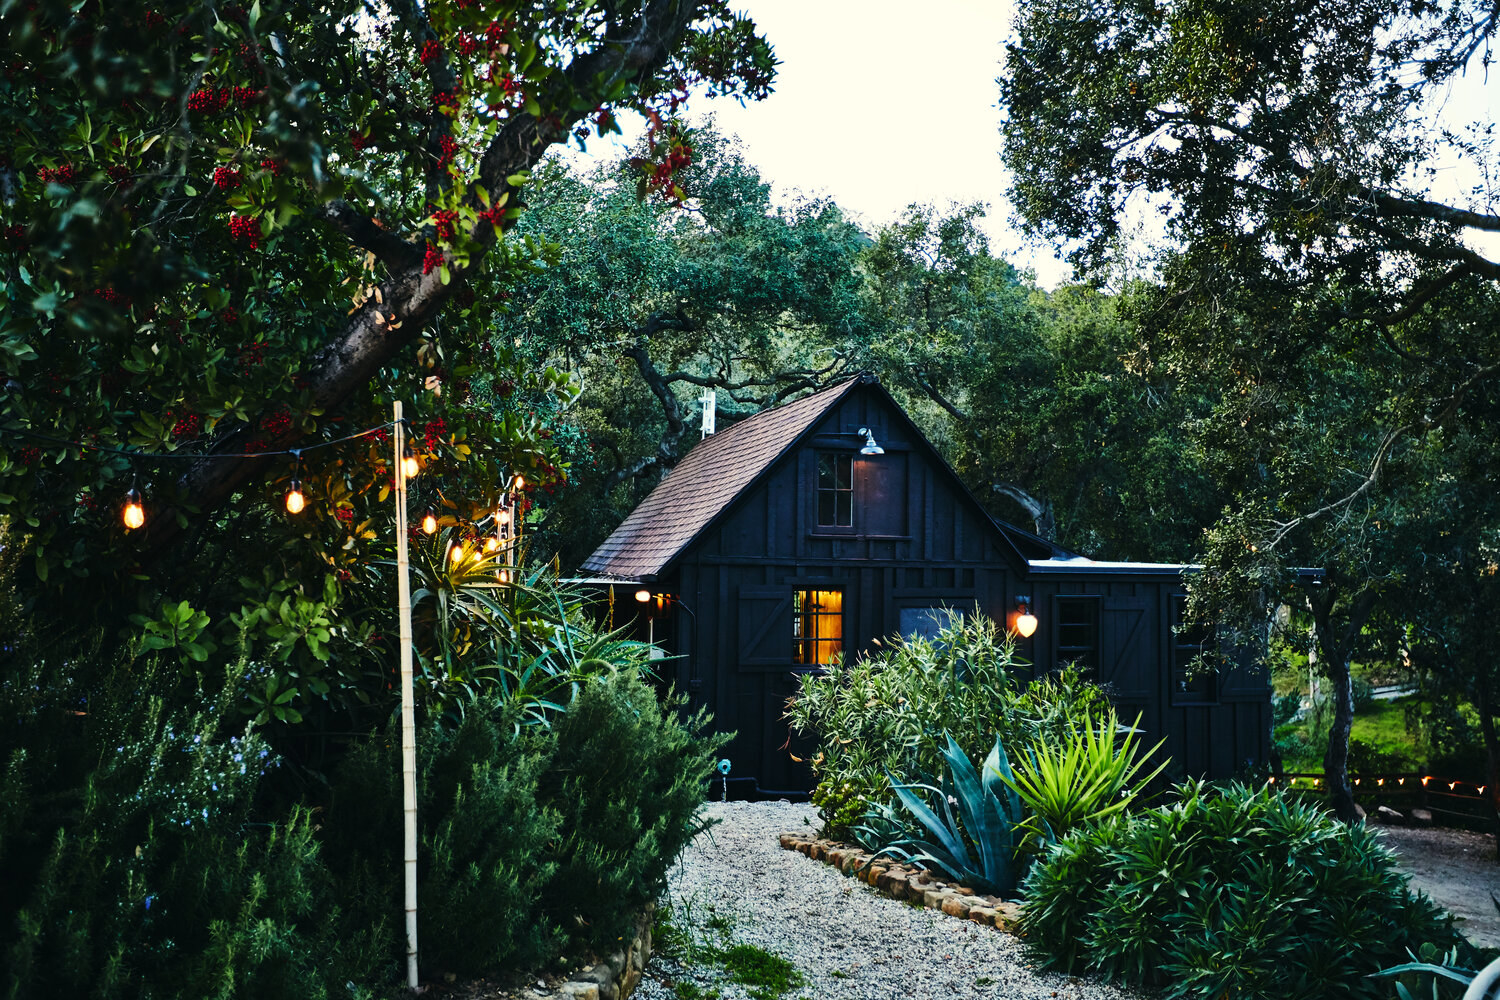 exterior shot of the all black house with gravel pathways and gardens